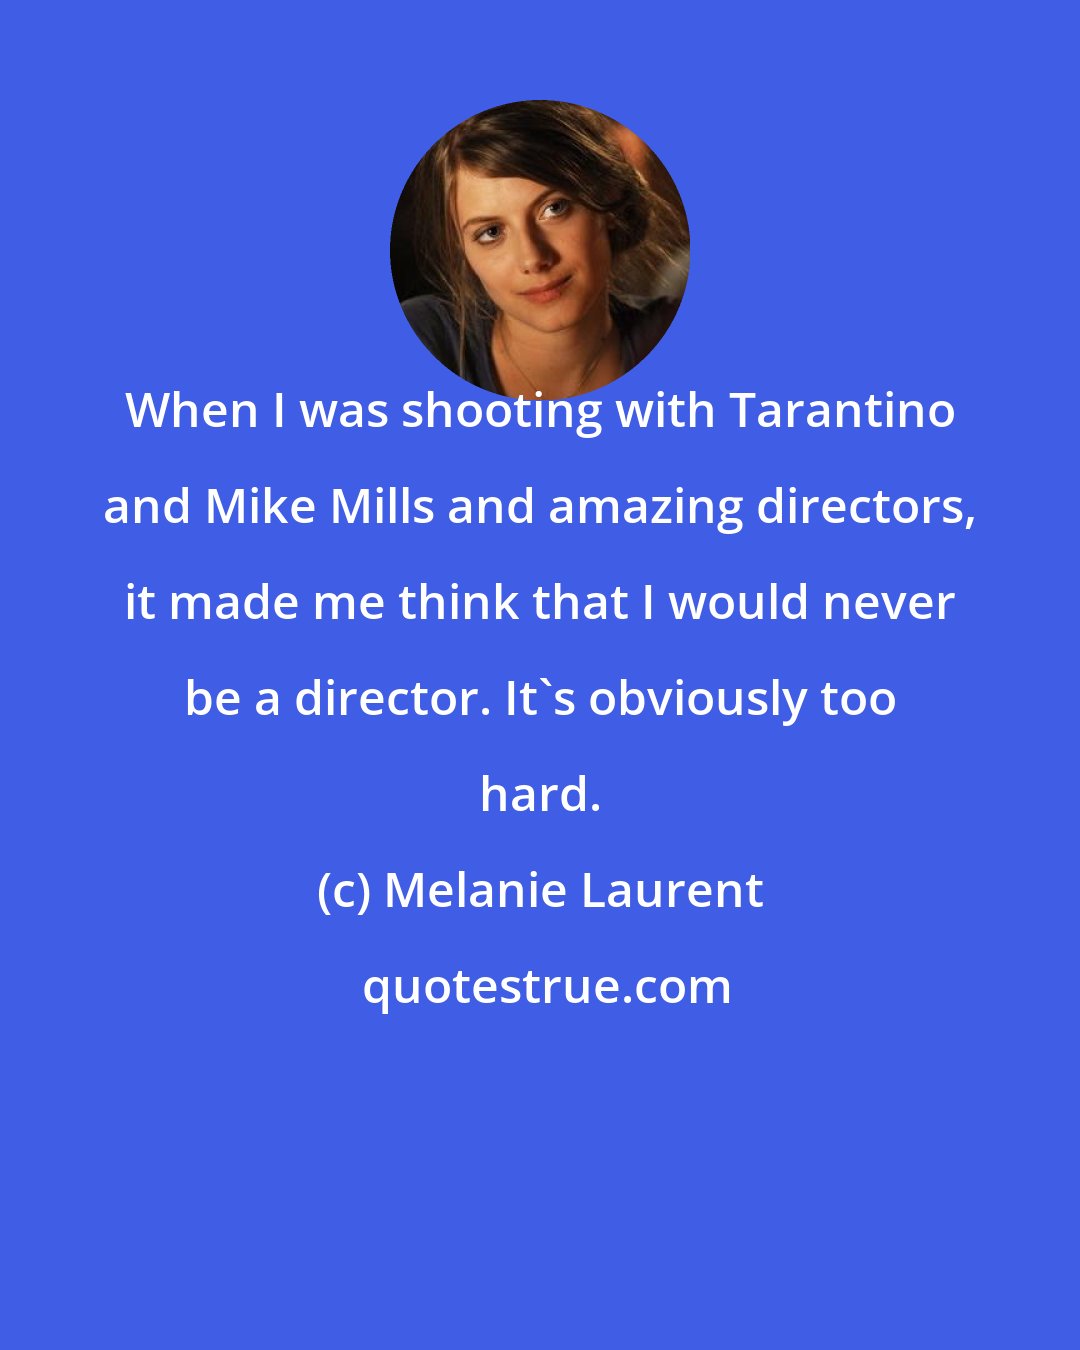 Melanie Laurent: When I was shooting with Tarantino and Mike Mills and amazing directors, it made me think that I would never be a director. It's obviously too hard.